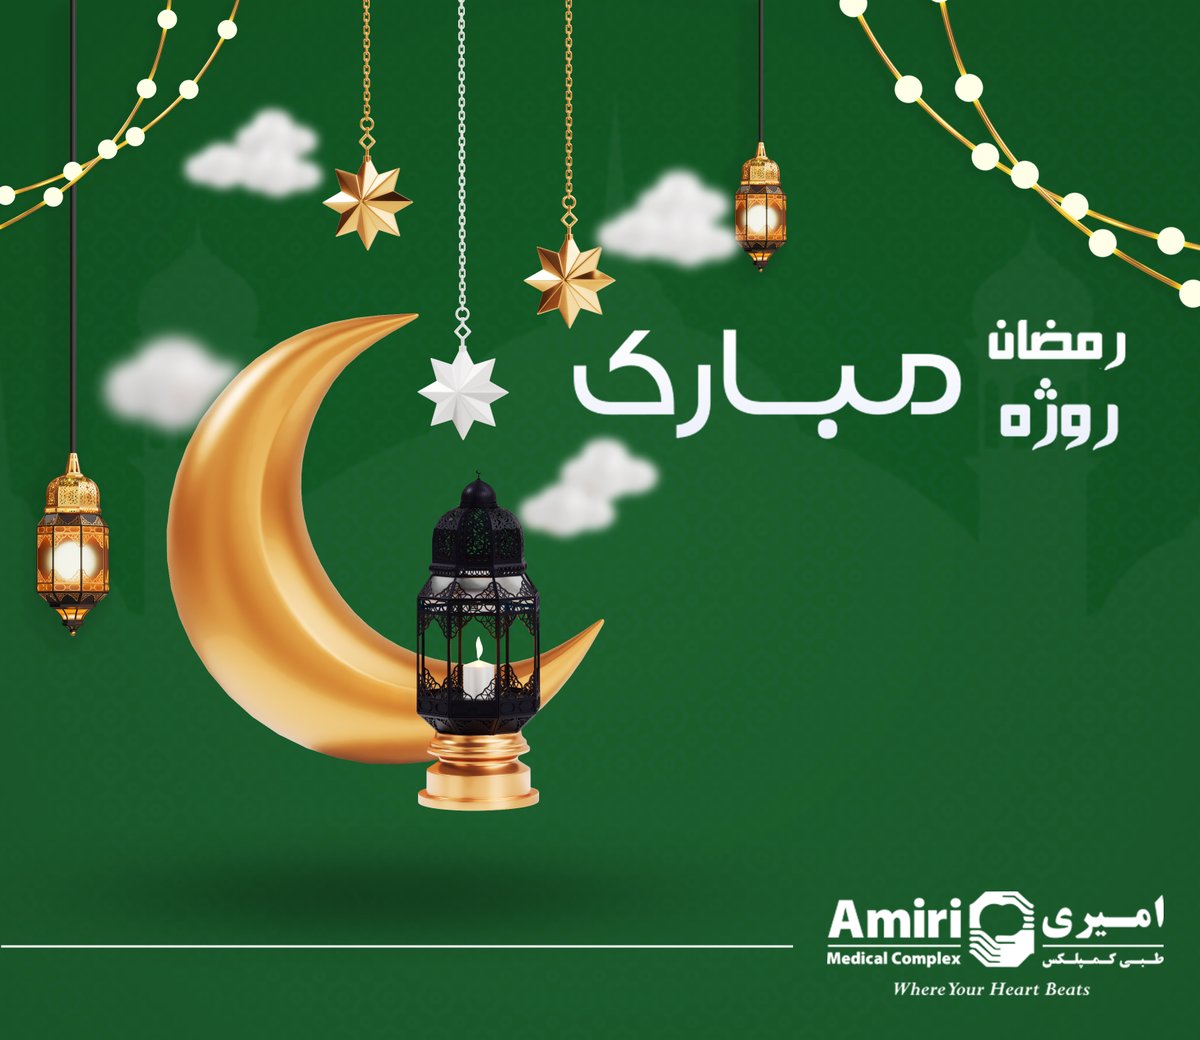 AMC congratulates and welcomes the blessed month of Ramadan to all citizens of Afghanistan, praise be to Allah and seek his help and forgiveness.